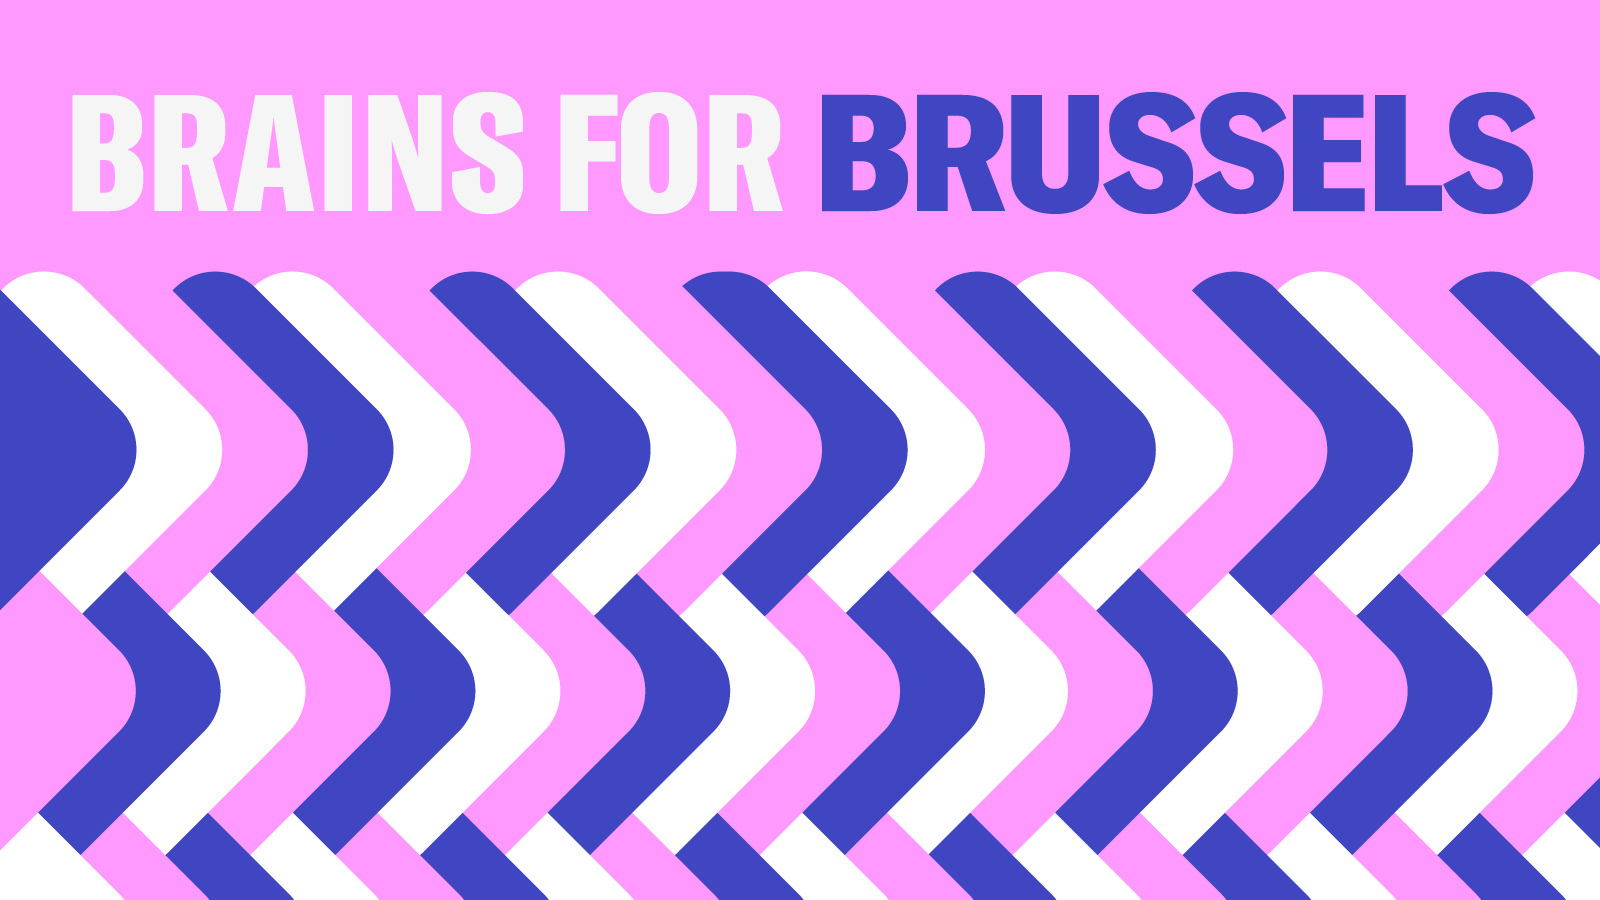 Brains for Brussels